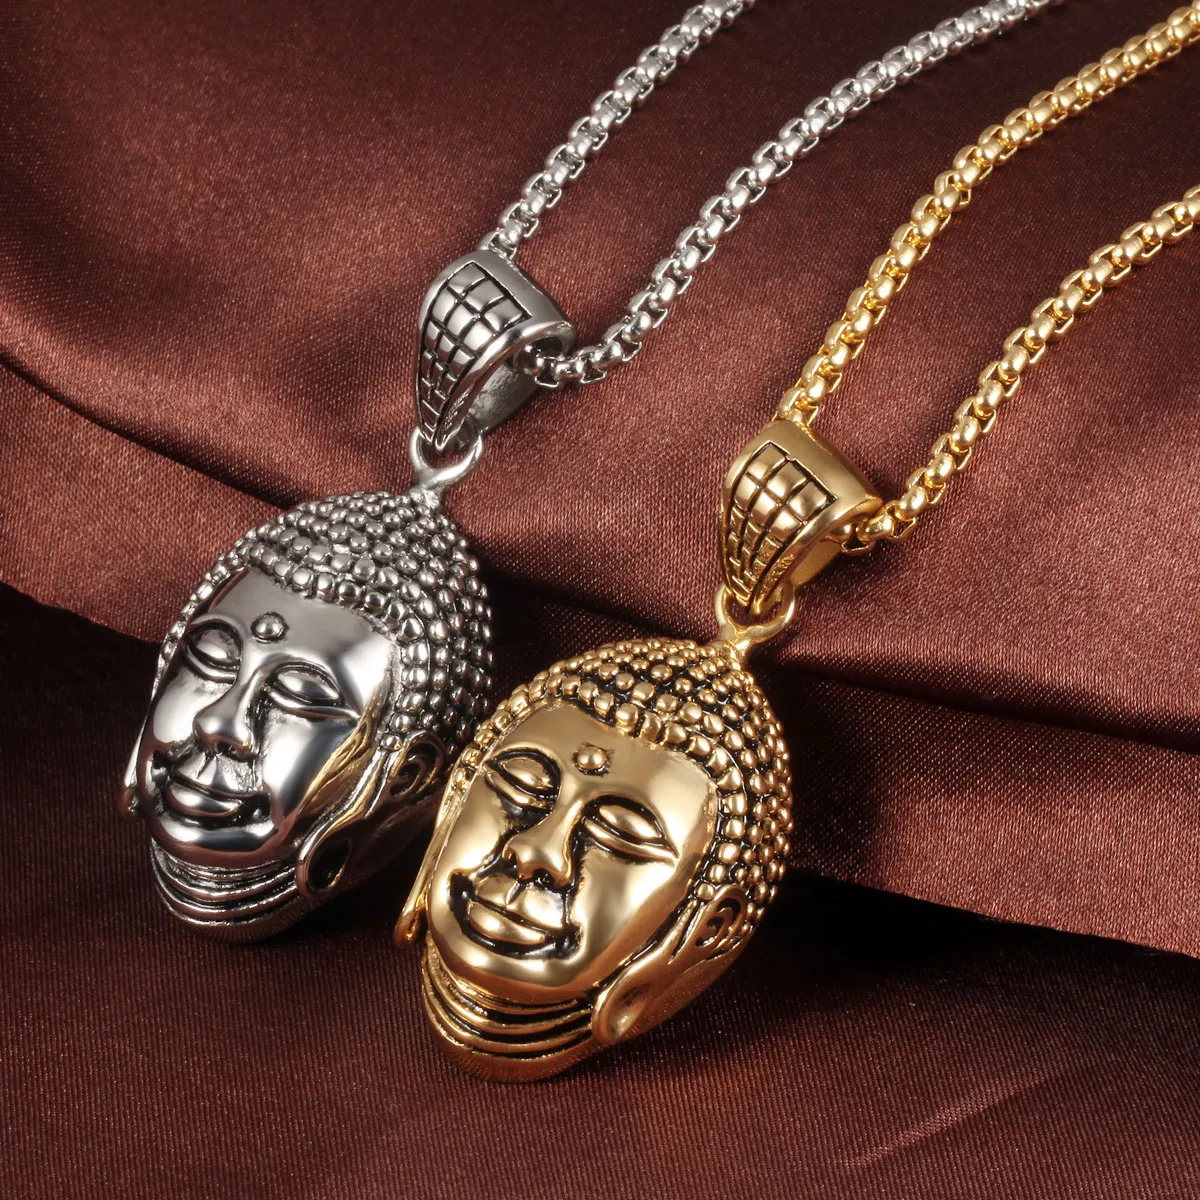 Gold / Silver Buddha Necklace Pendant stainless steel Jewelry For Men Gifts with free chain 22'' * 3MM Rolo Chain